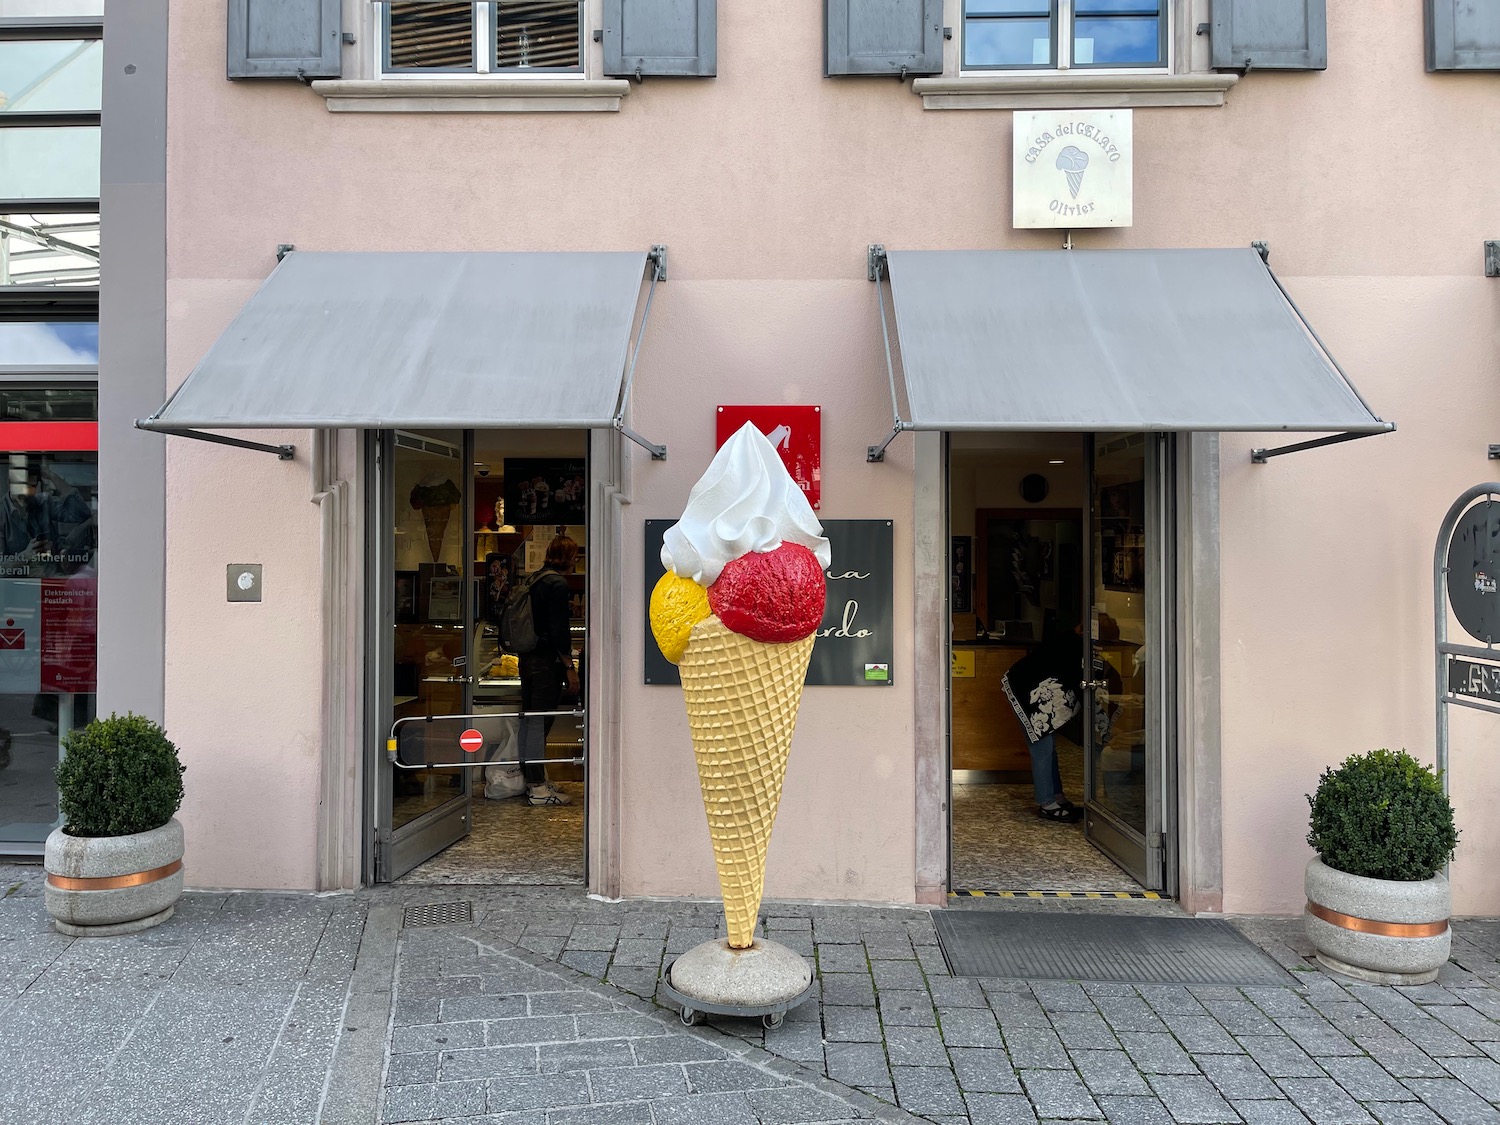 a large ice cream cone statue in front of a building